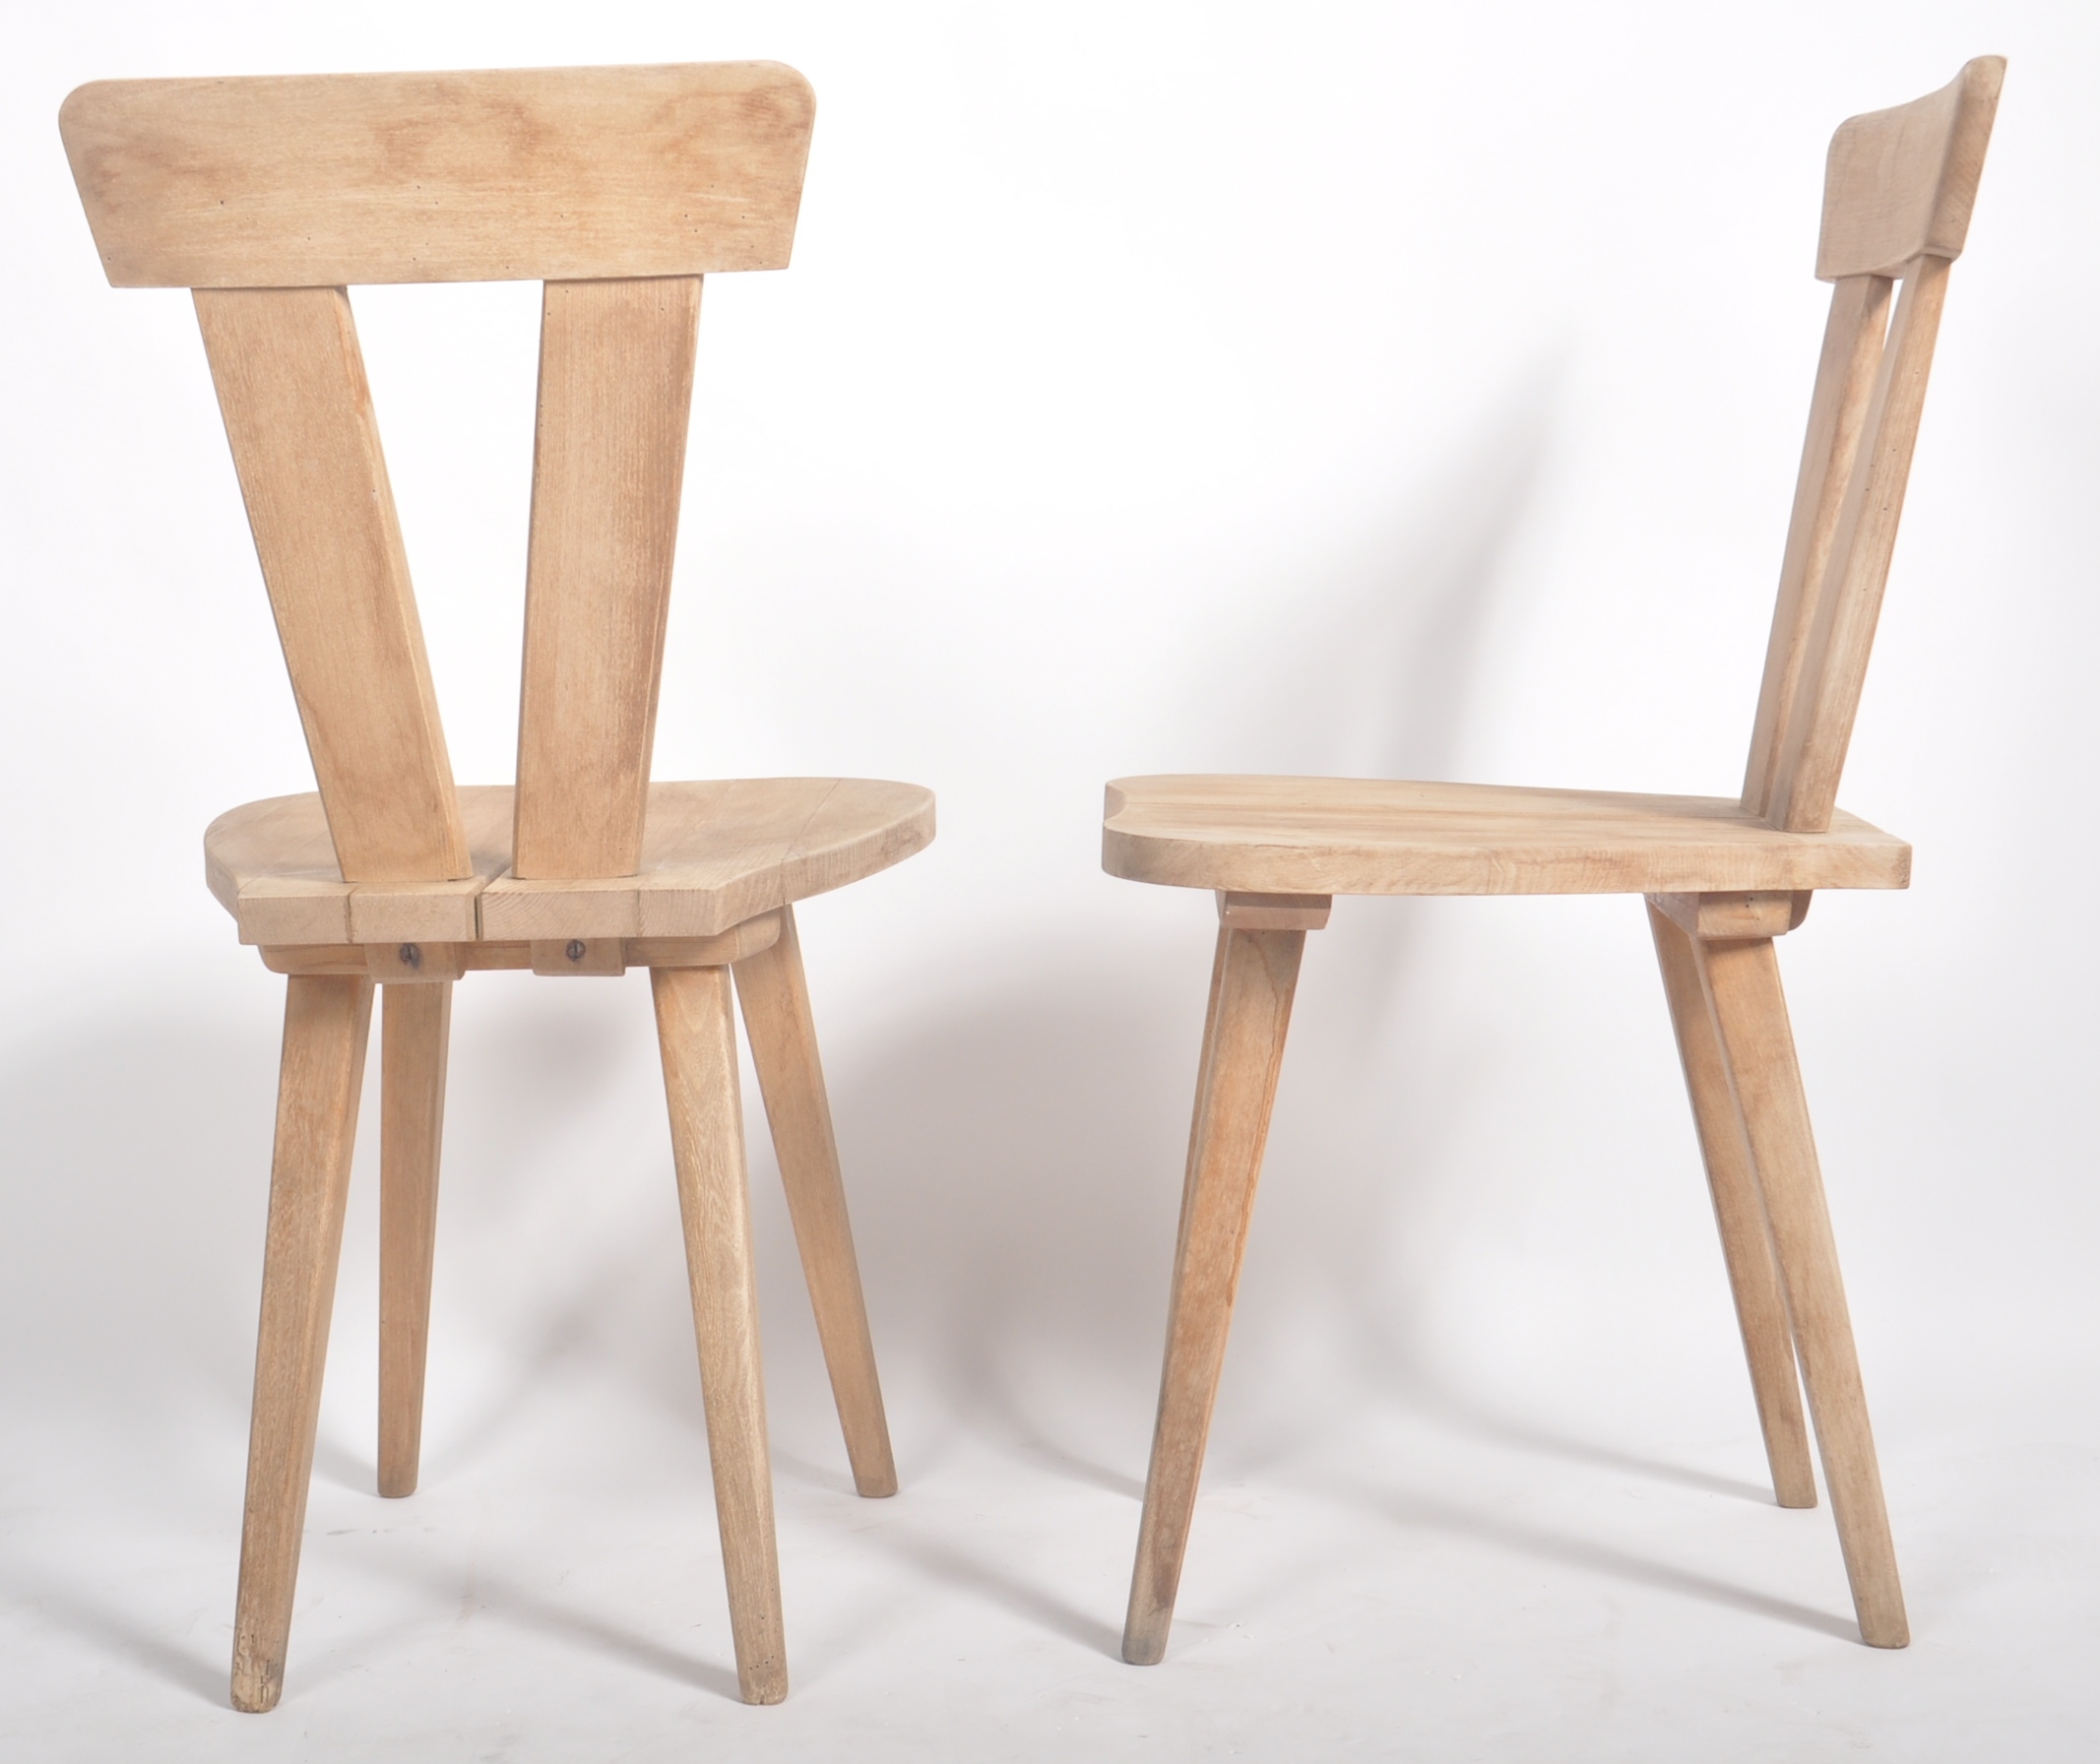 ZYDEL BY WINCZE & SZLEKYS - SET OF FOUR DINING CHAIRS - Image 6 of 7